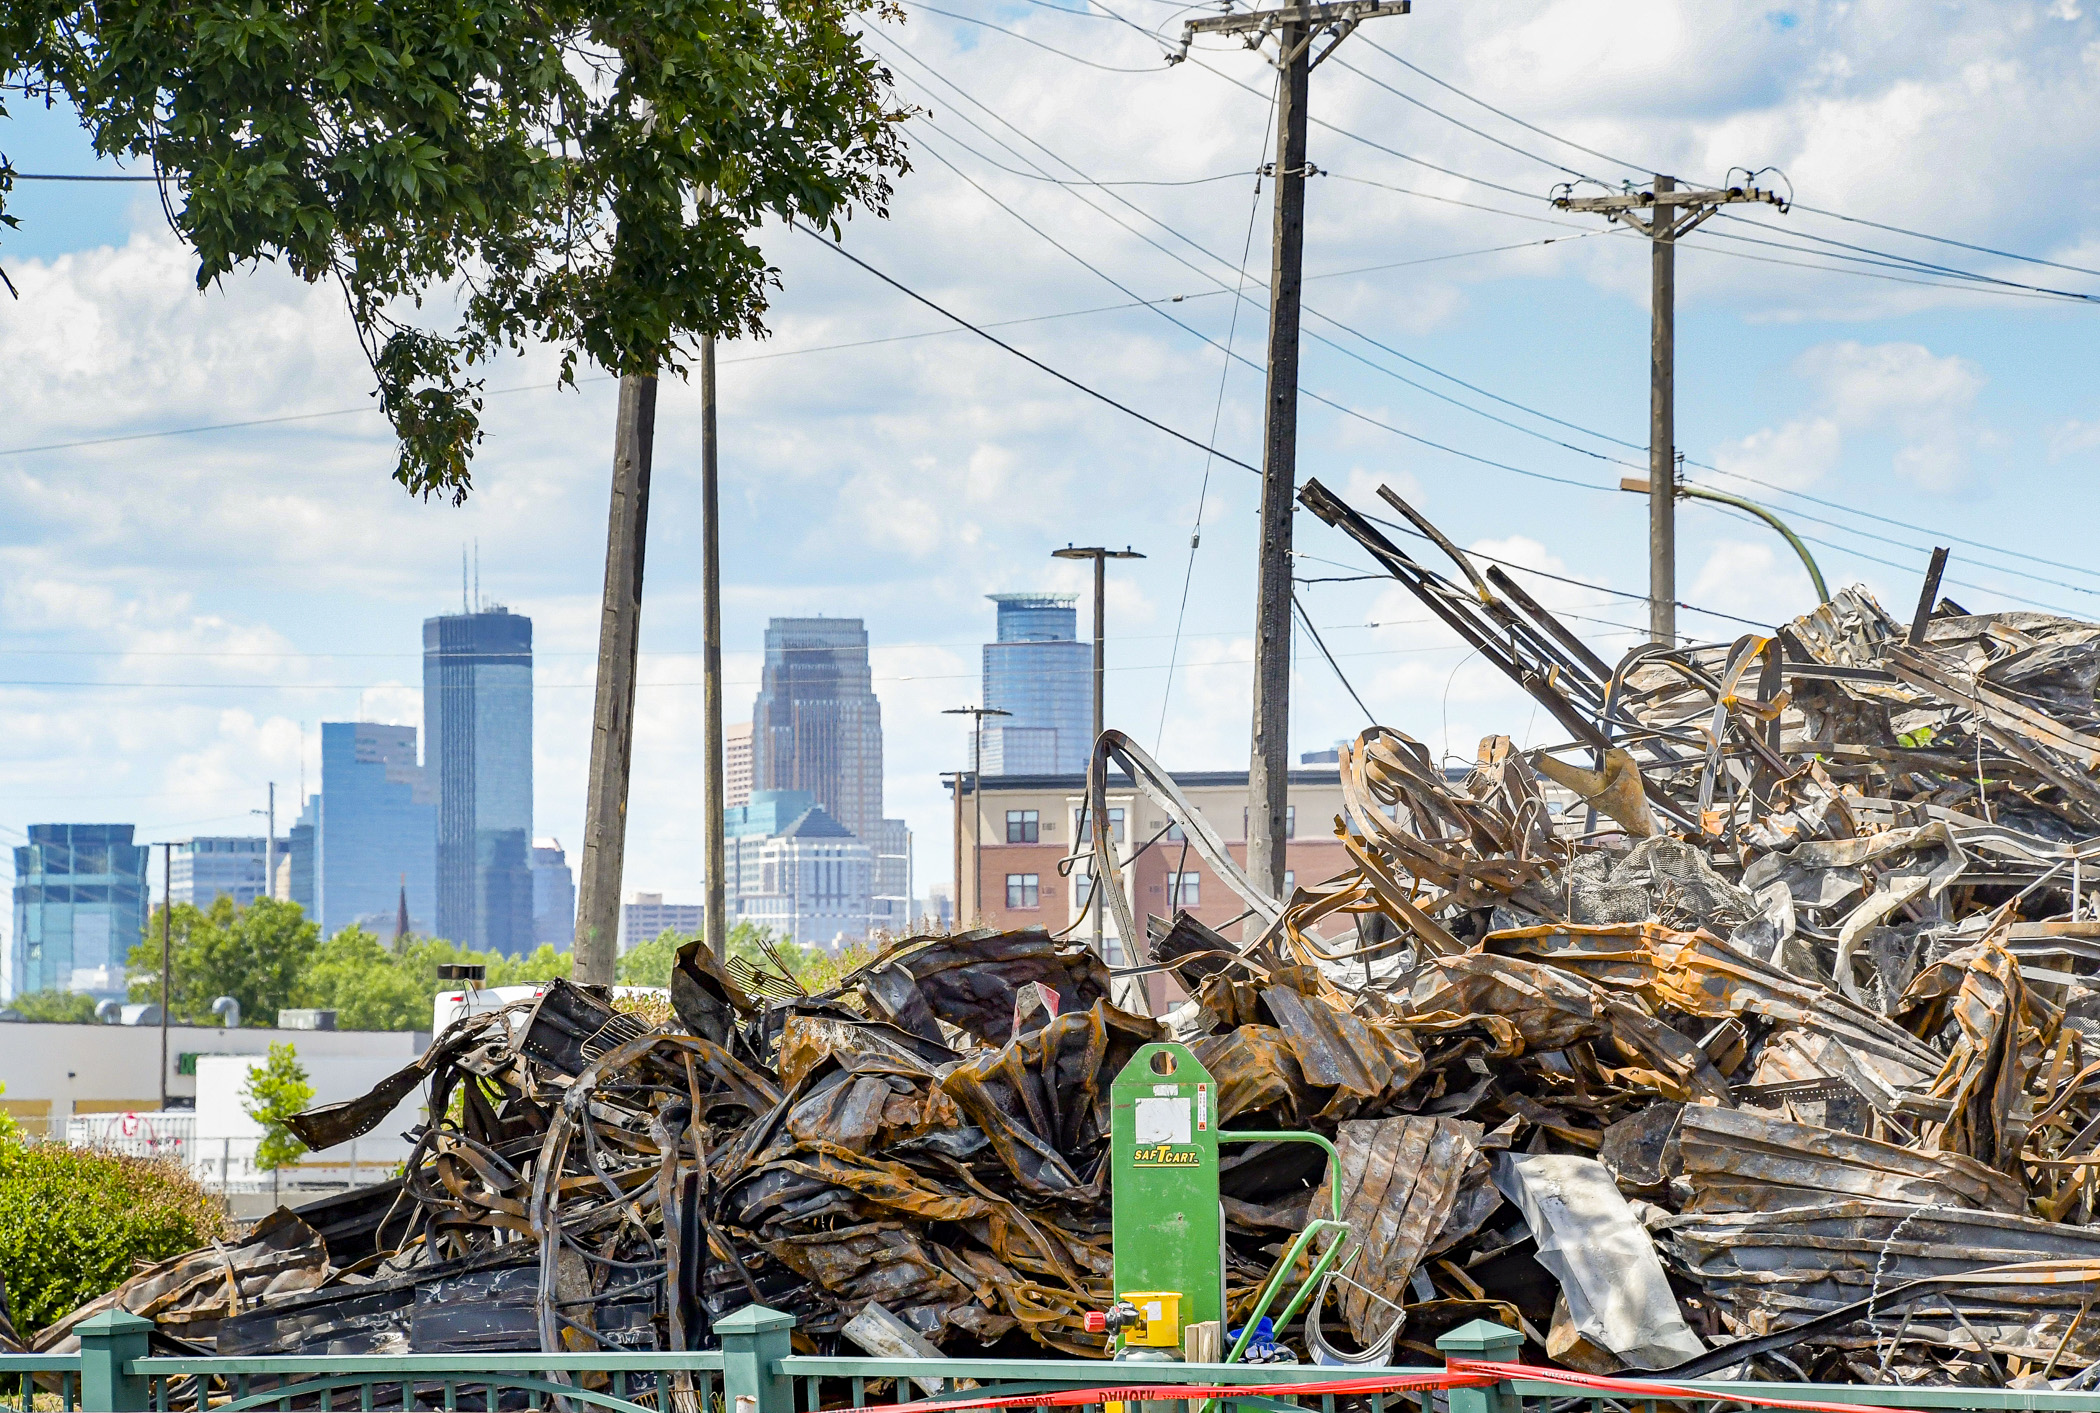 The House passed SSHF132 on Friday, a bill that would appropriate $300 million during the 2020-21 biennium to help rebuild areas of the Twin Cities damaged by recent civil unrest. Photo by Andrew VonBank